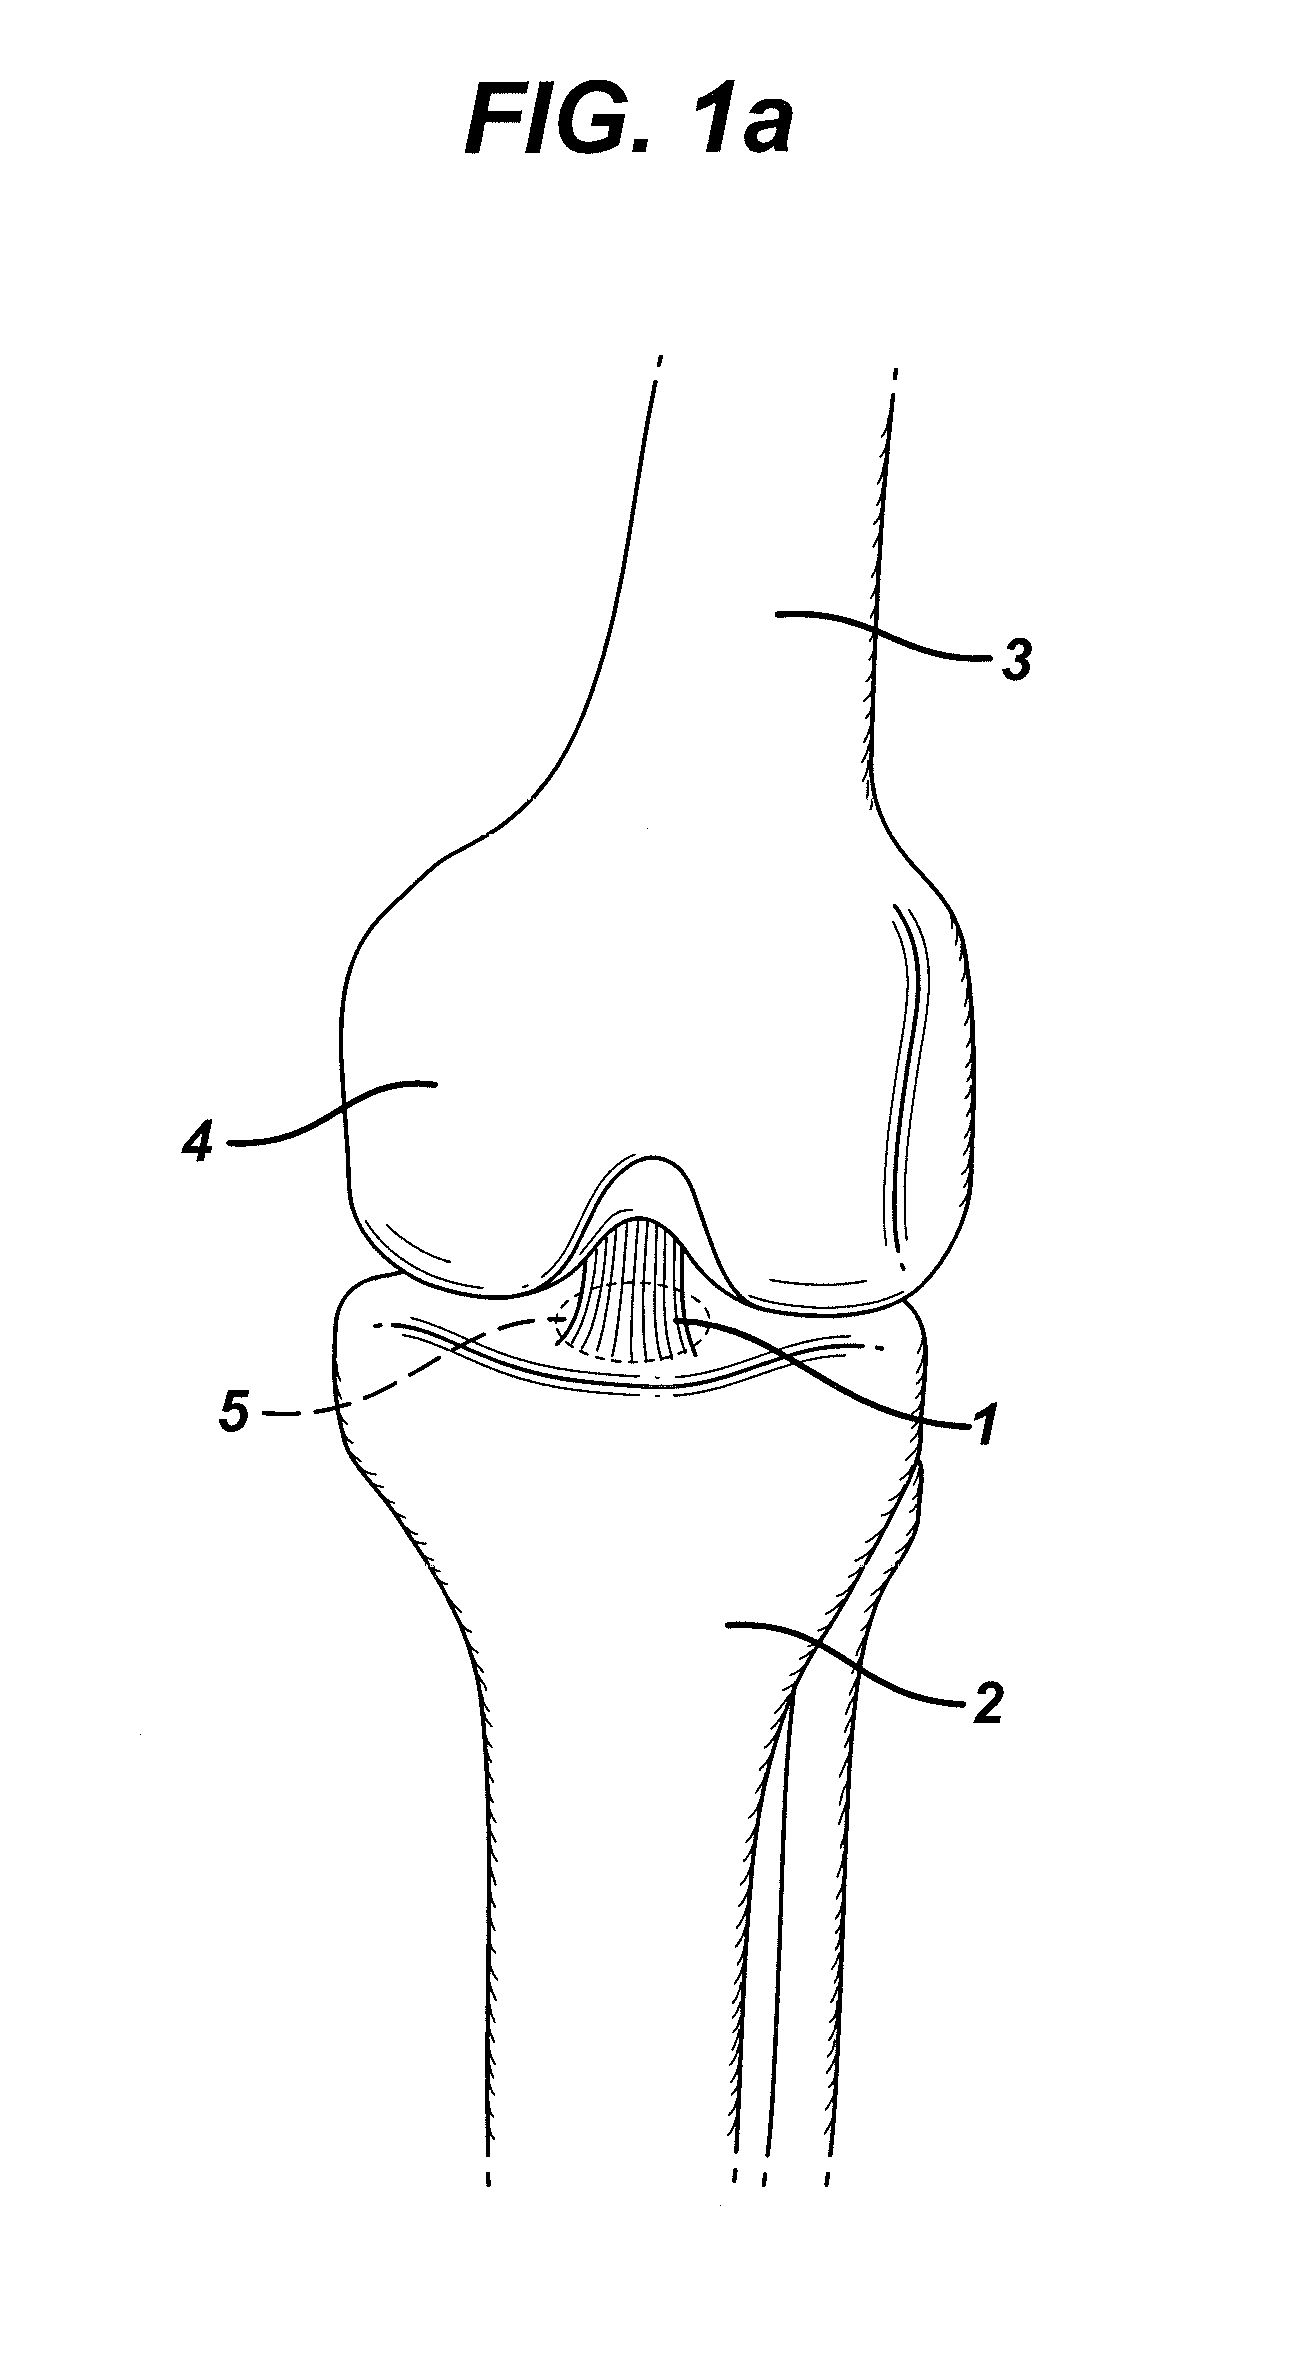 Method of anchoring autologous or artificial tendon grafts in bone